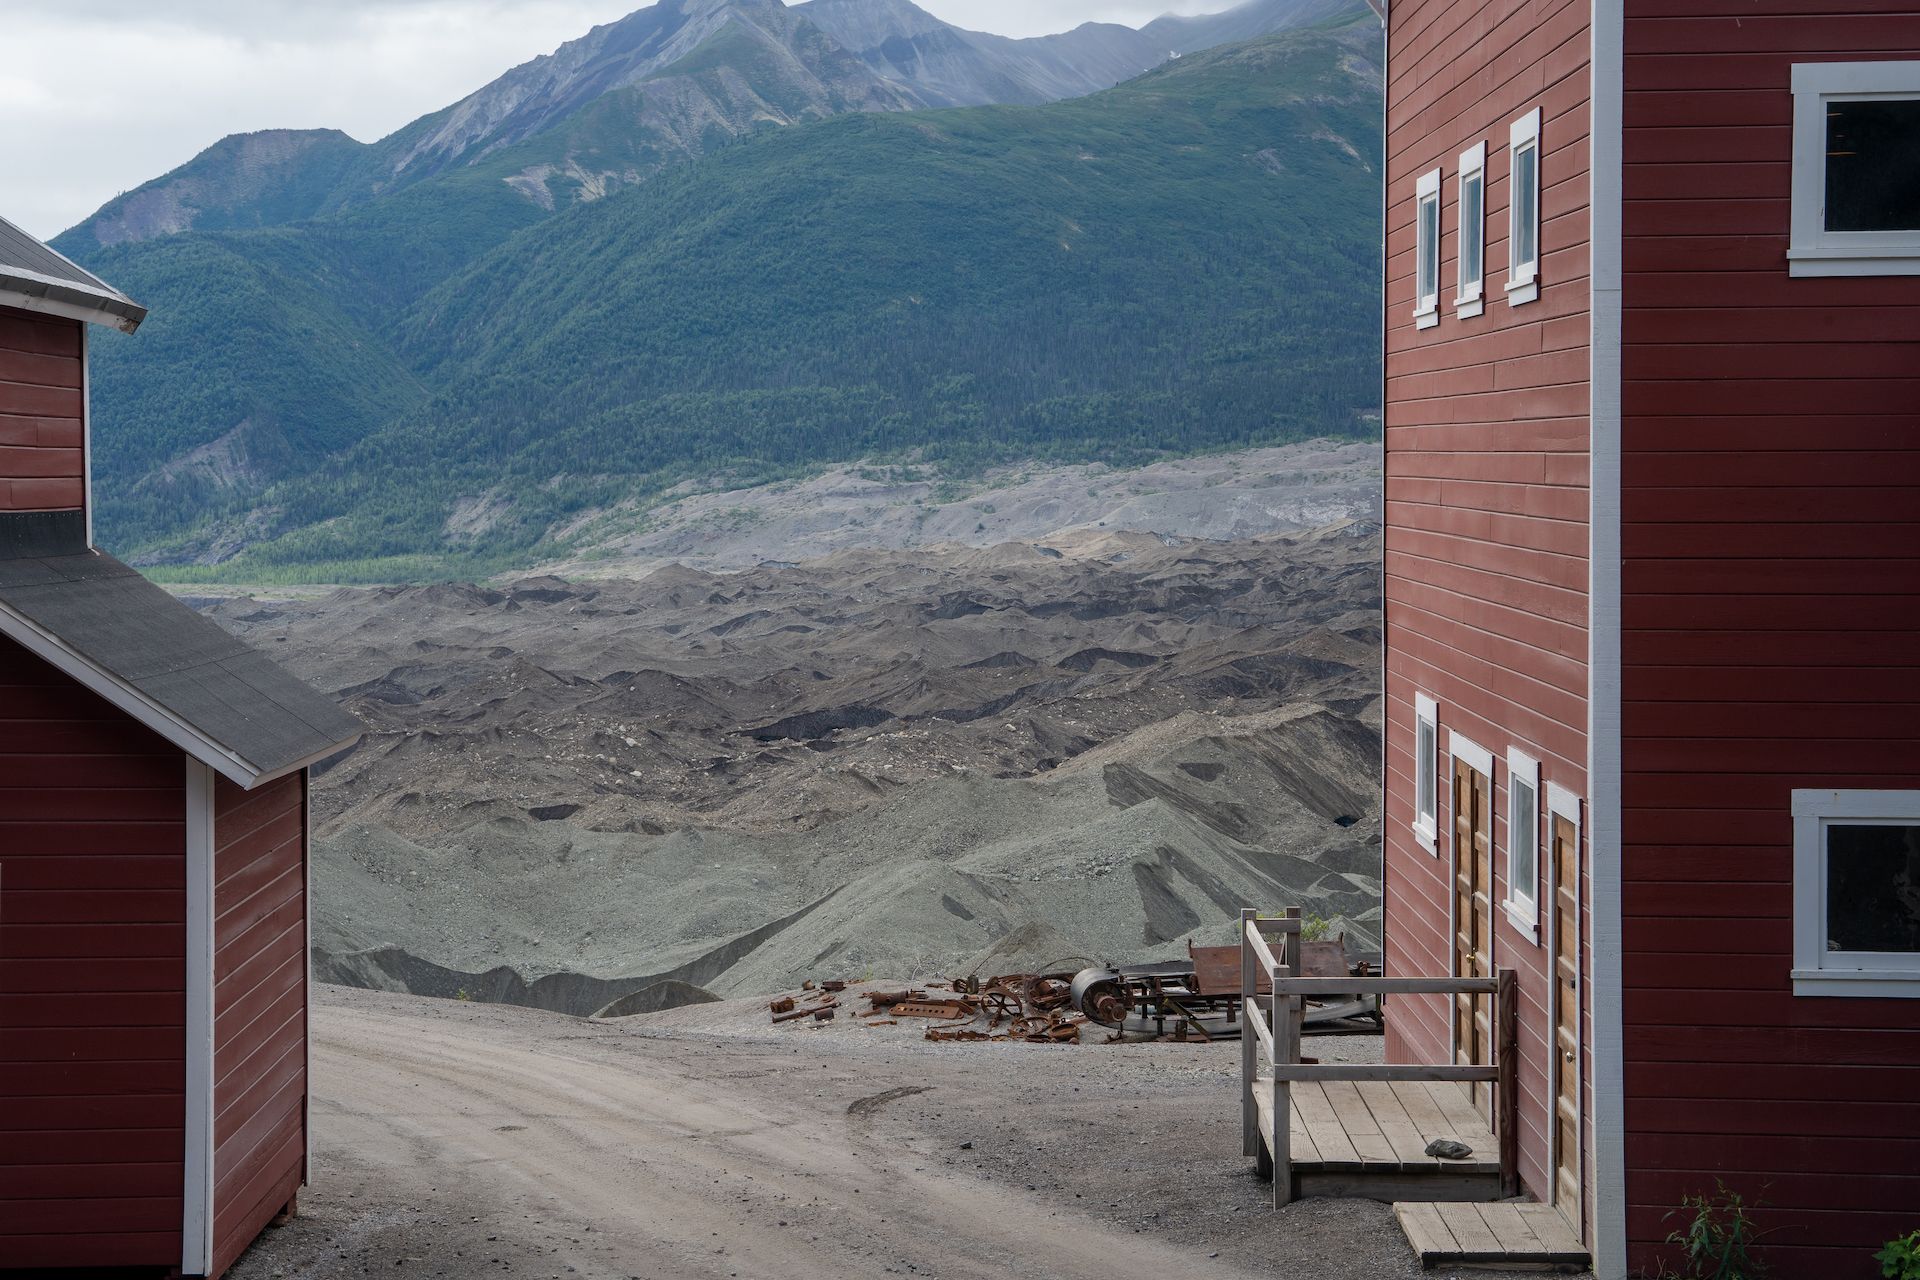 The mine was built alongside the Kennicott Glacier. The “dirt” that you see behind the building was not coming from the mines, but was actually a moraine, debris pushed by the glacier on top of the ice layer.